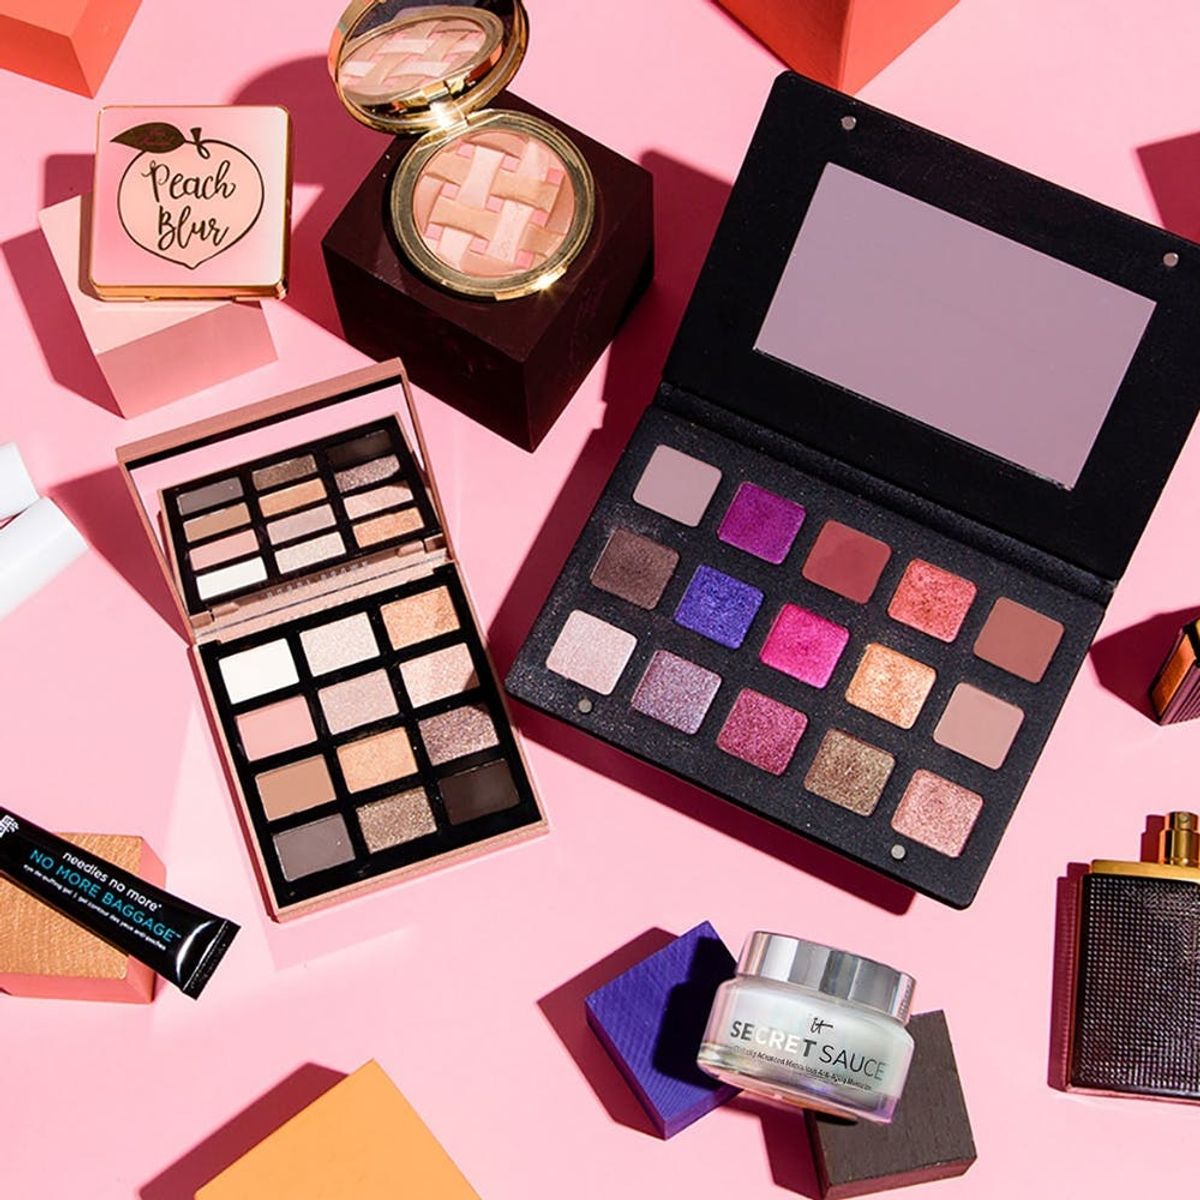 Fall into Beauty With These 10 New Products from Sephora - Brit + Co